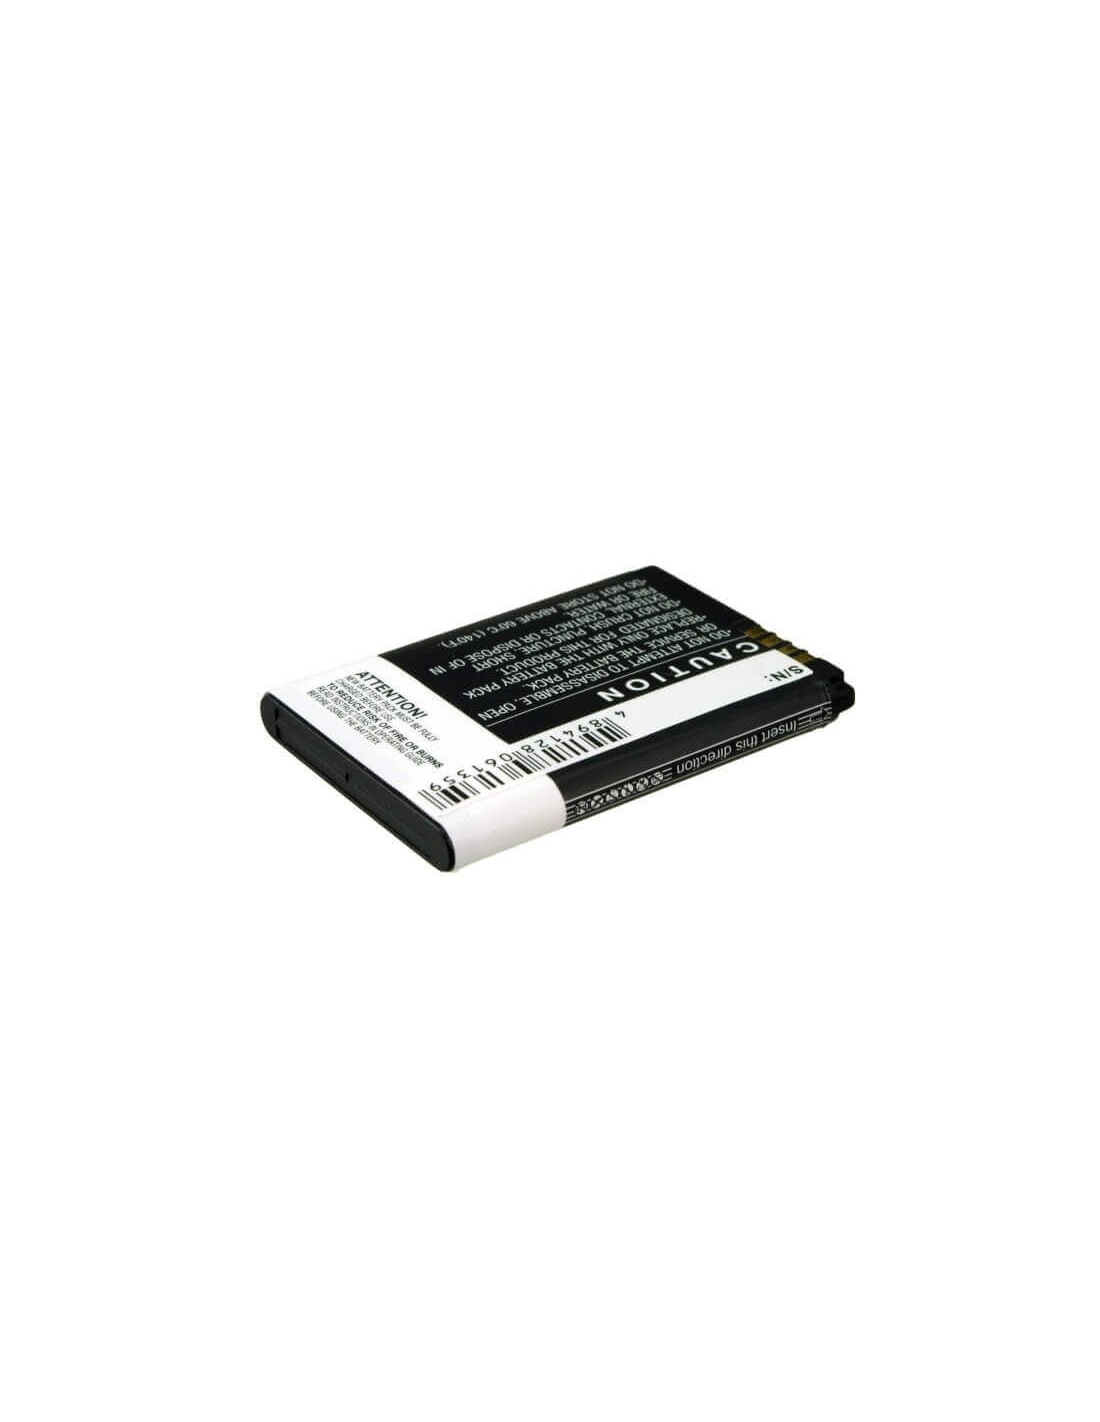 Battery for LG VN270 Cosmos Touch, Cosmos Touch VN270, VN270 3.7V, 1000mAh - 3.70Wh